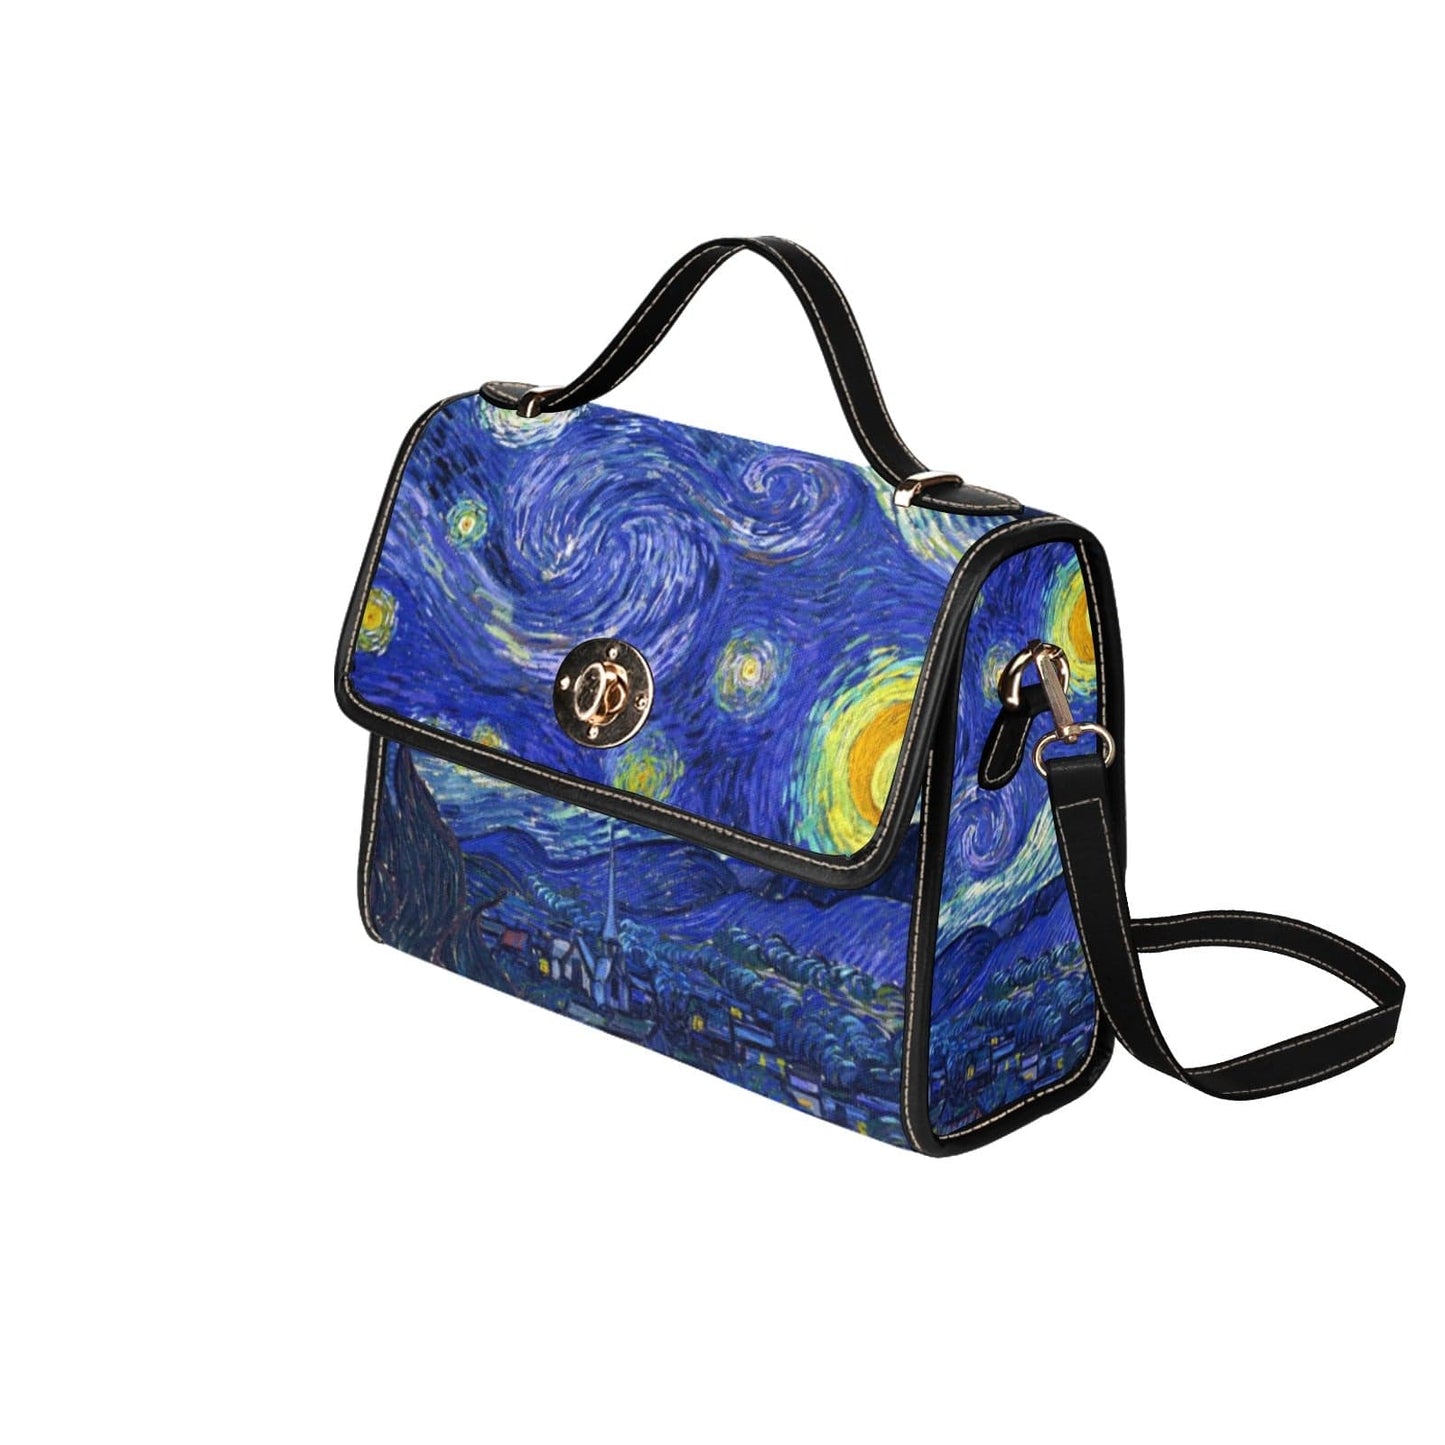 alternative side view of the famous Van Gogh Starry Night printed on a high quality boxy satchel at Gallery Serpentine